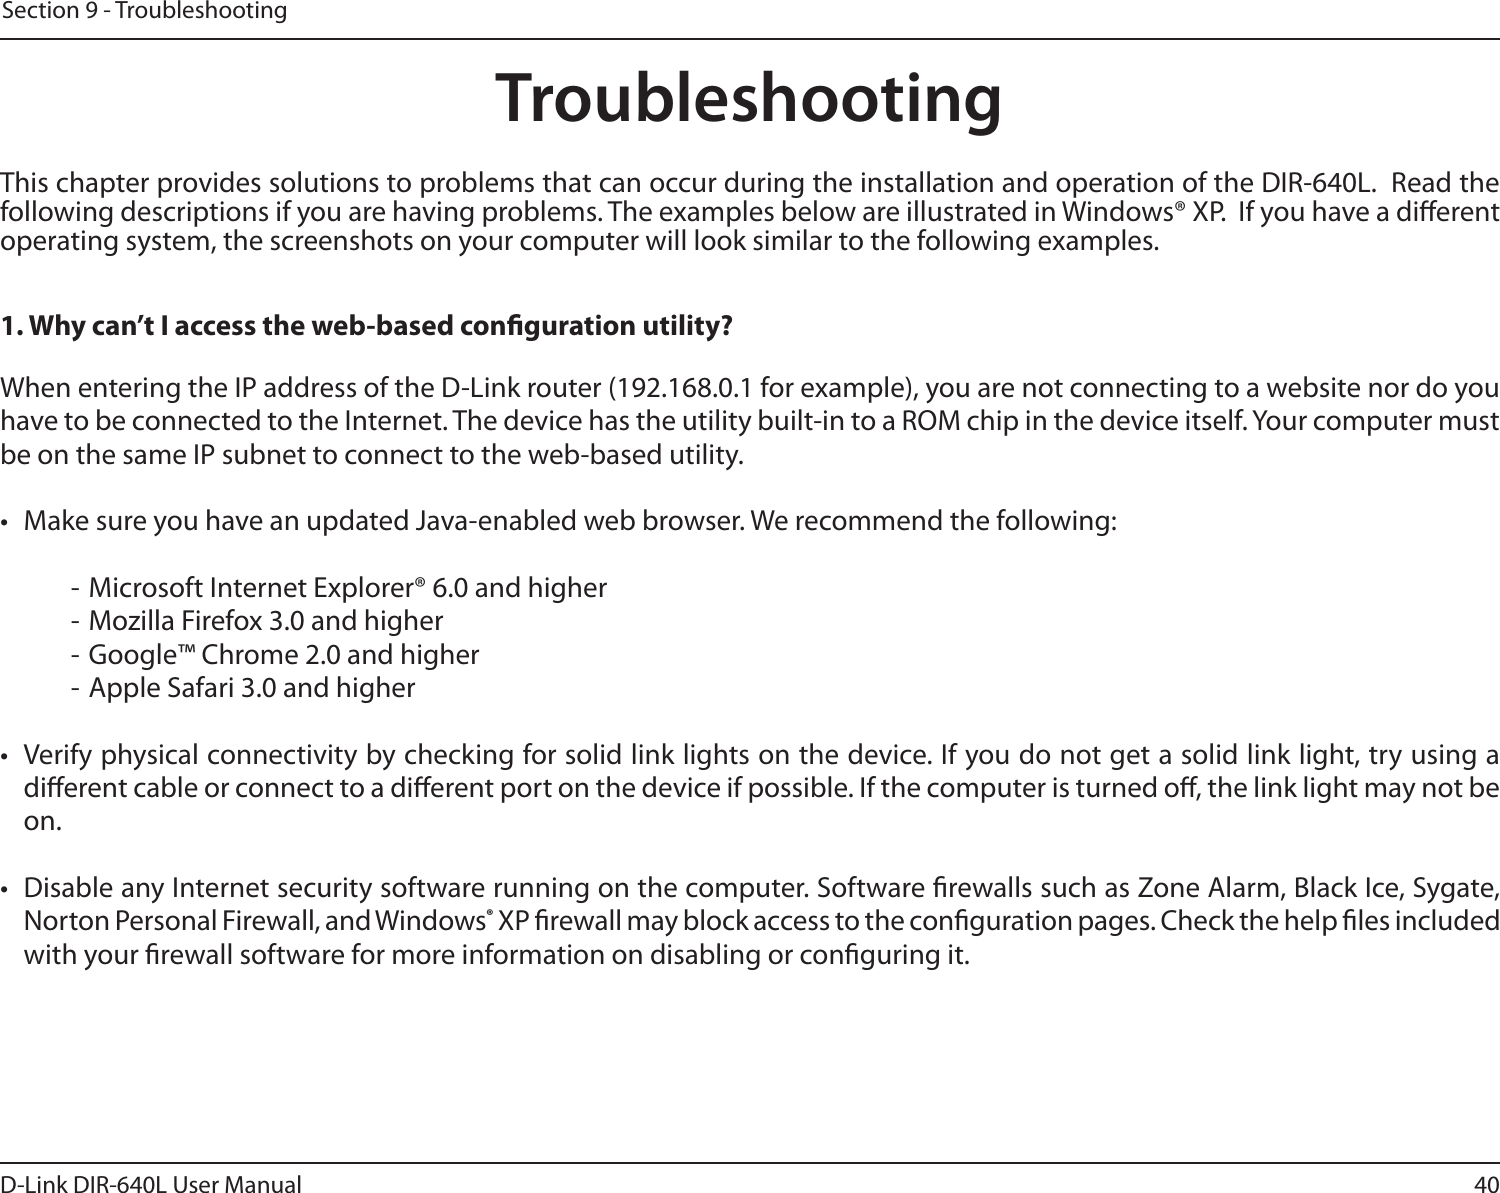 40D-Link DIR-640L User ManualSection 9 - TroubleshootingTroubleshootingThis chapter provides solutions to problems that can occur during the installation and operation of the DIR-640L.  Read the following descriptions if you are having problems. The examples below are illustrated in Windows® XP.  If you have a dierent operating system, the screenshots on your computer will look similar to the following examples.1. Why can’t I access the web-based conguration utility?When entering the IP address of the D-Link router (192.168.0.1 for example), you are not connecting to a website nor do you have to be connected to the Internet. The device has the utility built-in to a ROM chip in the device itself. Your computer must be on the same IP subnet to connect to the web-based utility. •  Make sure you have an updated Java-enabled web browser. We recommend the following:  - Microsoft Internet Explorer® 6.0 and higher- Mozilla Firefox 3.0 and higher- Google™ Chrome 2.0 and higher- Apple Safari 3.0 and higher•  Verify physical connectivity by checking for solid link lights on the device. If you do not get a solid link light, try using a dierent cable or connect to a dierent port on the device if possible. If the computer is turned o, the link light may not be on.•  Disable any Internet security software running on the computer. Software rewalls such as Zone Alarm, Black Ice, Sygate, Norton Personal Firewall, and Windows® XP rewall may block access to the conguration pages. Check the help les included with your rewall software for more information on disabling or conguring it.